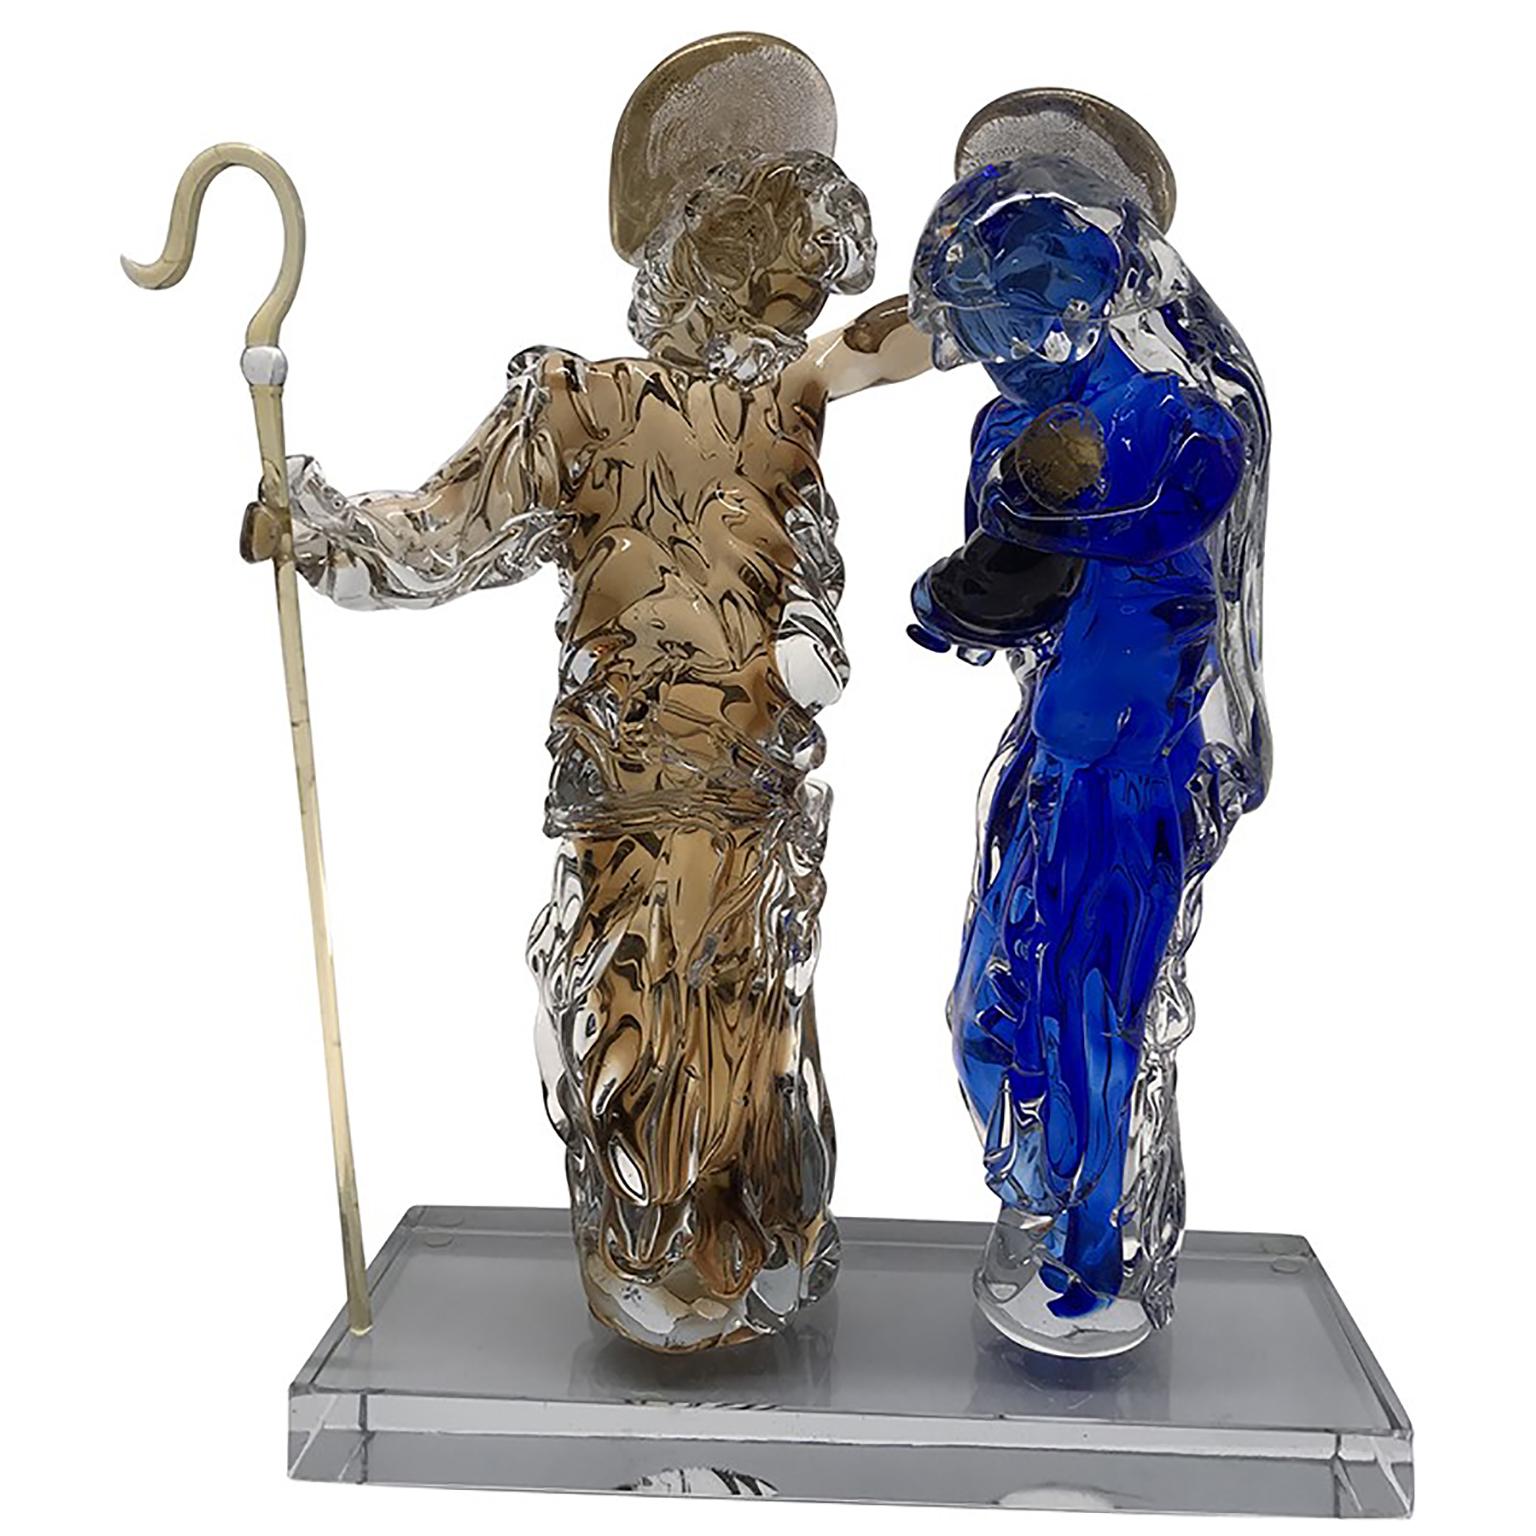 Minimalist Aritistic Murano Glass Holy Family Sculpture by Roberto Beltrami For Sale